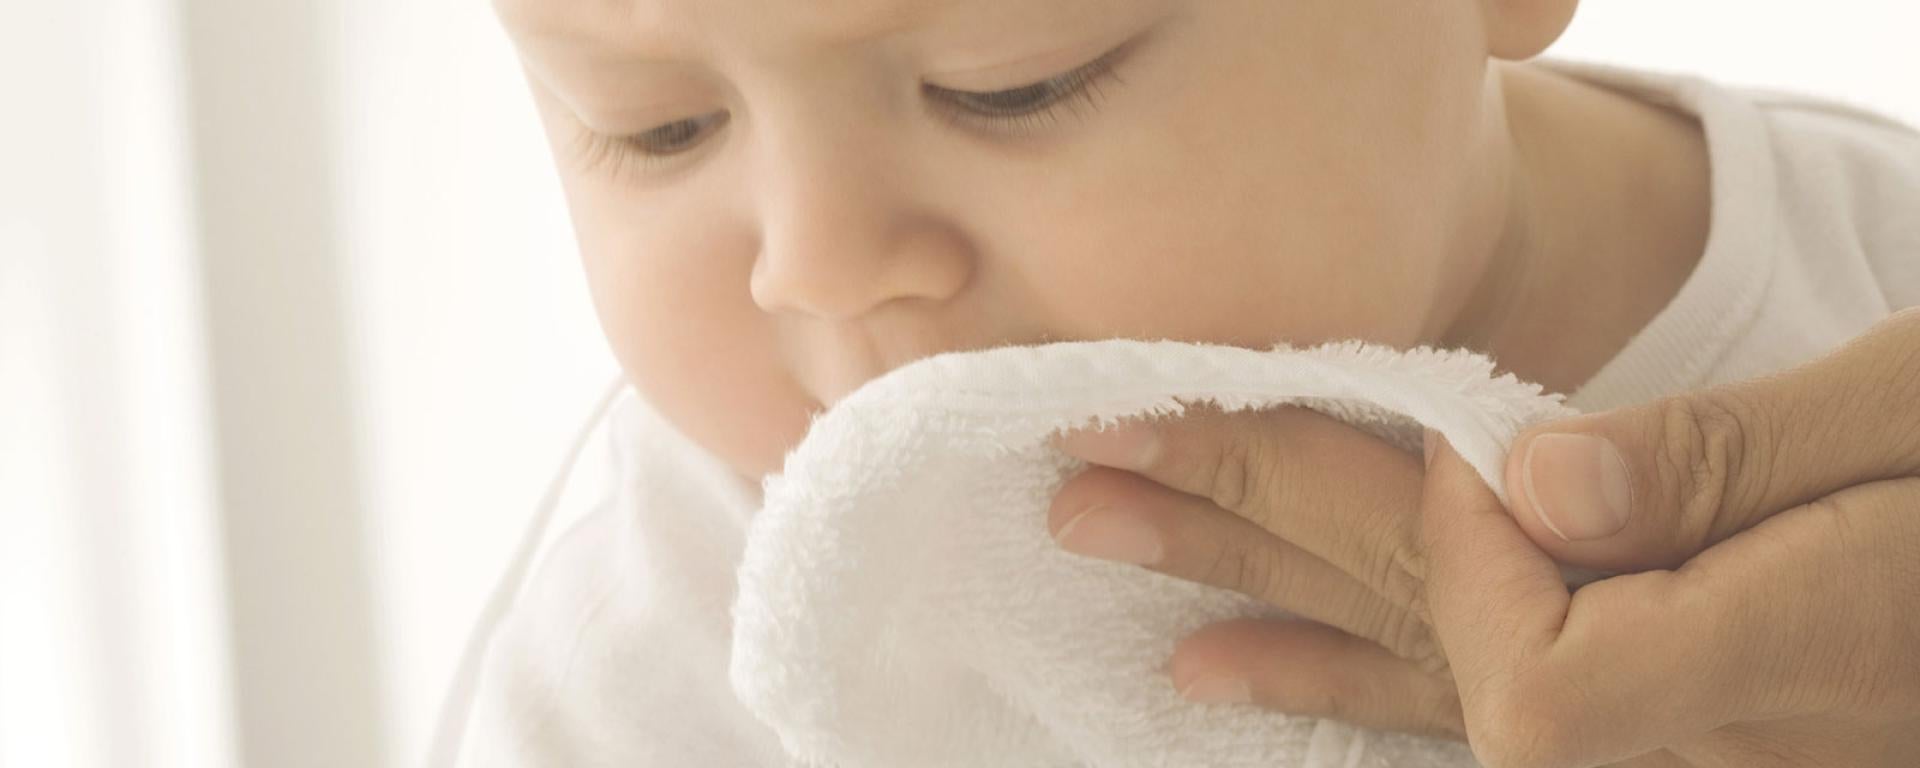 Parent cleaning newborn's face with cotton wool